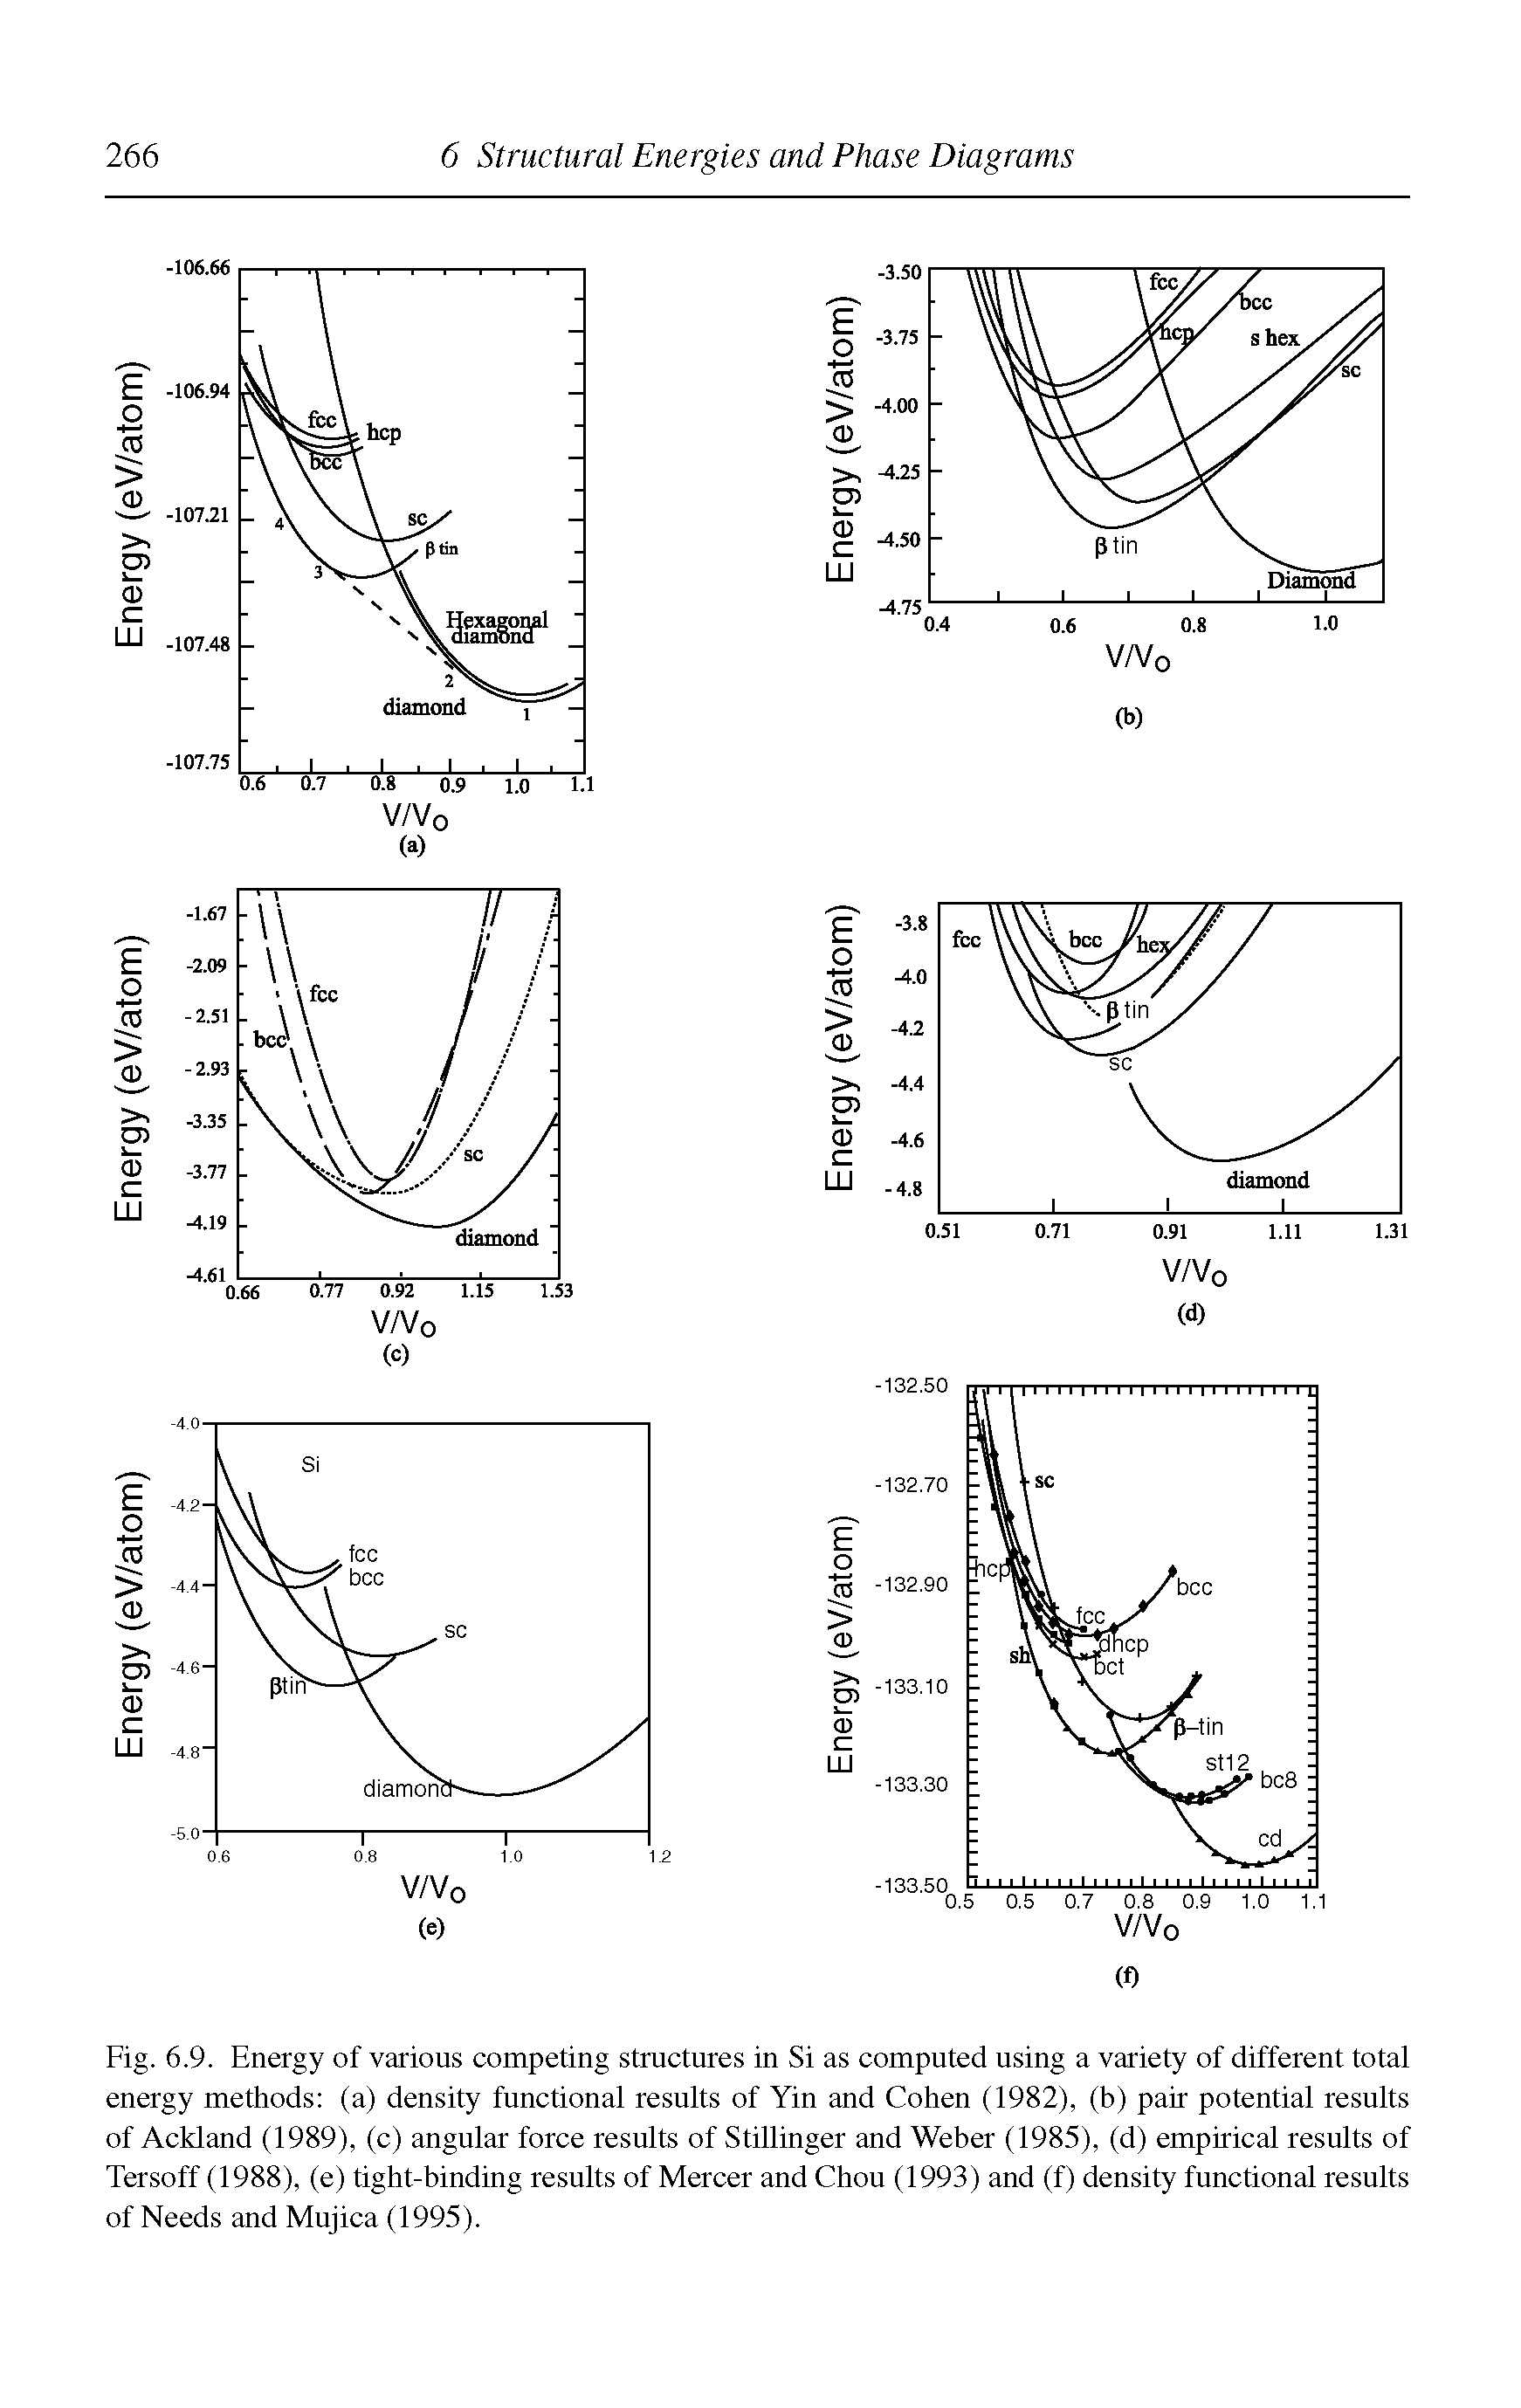 Fig. 6.9. Energy of various competing structures in Si as computed using a variety of different total energy methods (a) density functional results of Yin and Cohen (1982), (b) pair potential results of Ackland (1989), (c) angular force results of Stillinger and Weber (1985), (d) empirical results of Tersoff (1988), (e) tight-binding results of Mercer and Chou (1993) and (f) density functional results of Needs and Mujica (1995).